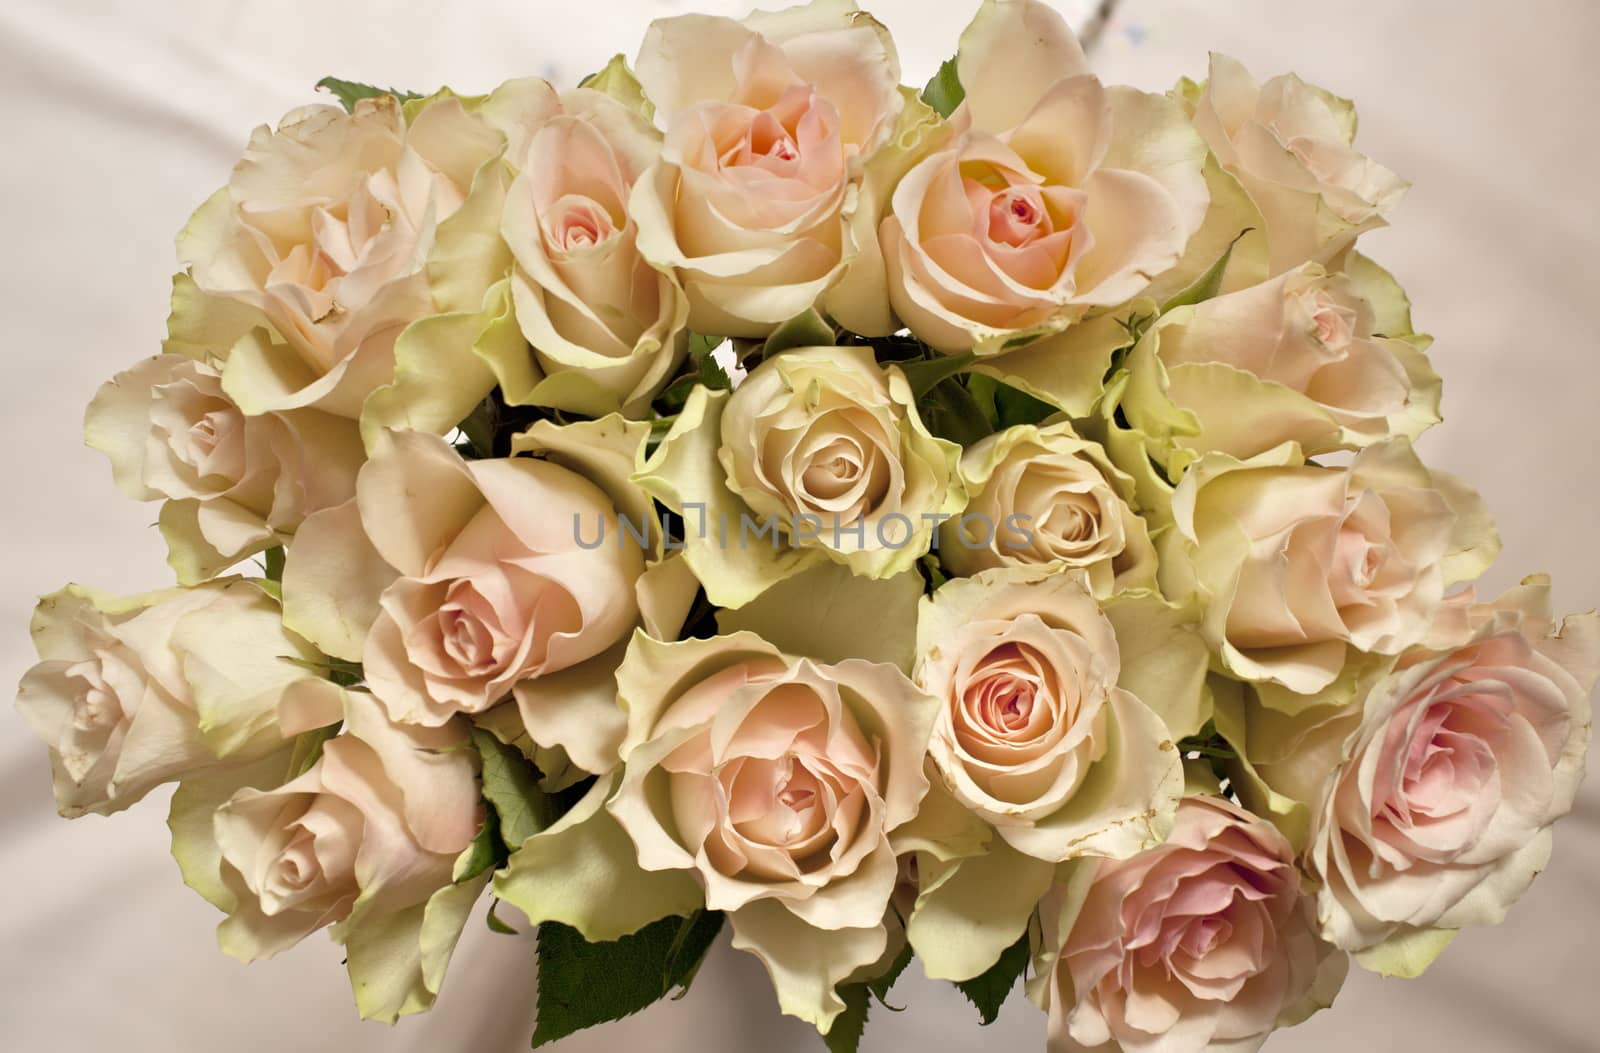 roses beautiful bouquet by mrivserg